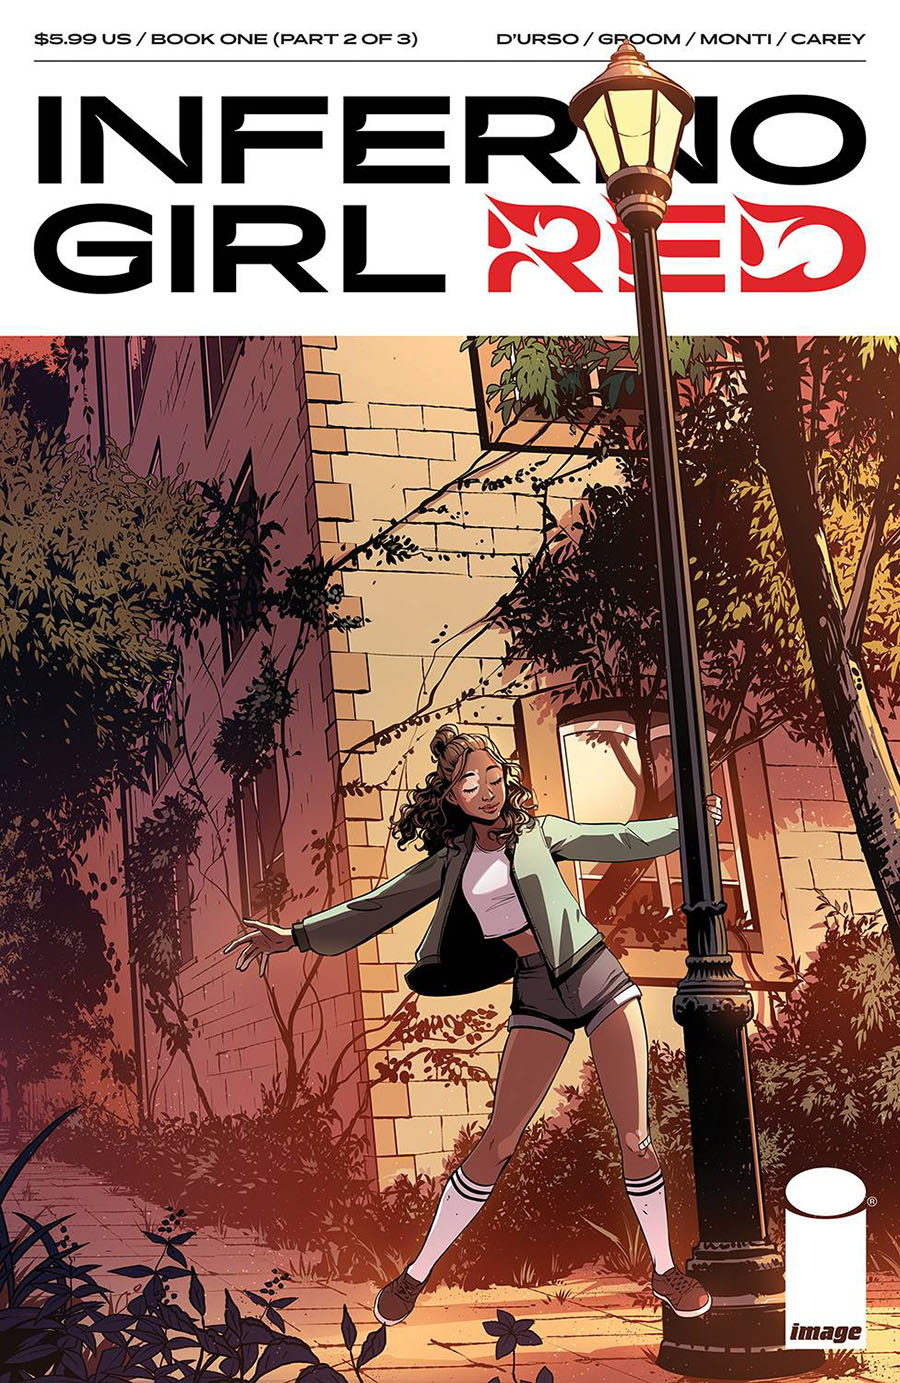 Inferno Girl Red Book 1 #2 Cover C Variant Kath Lobo Cover